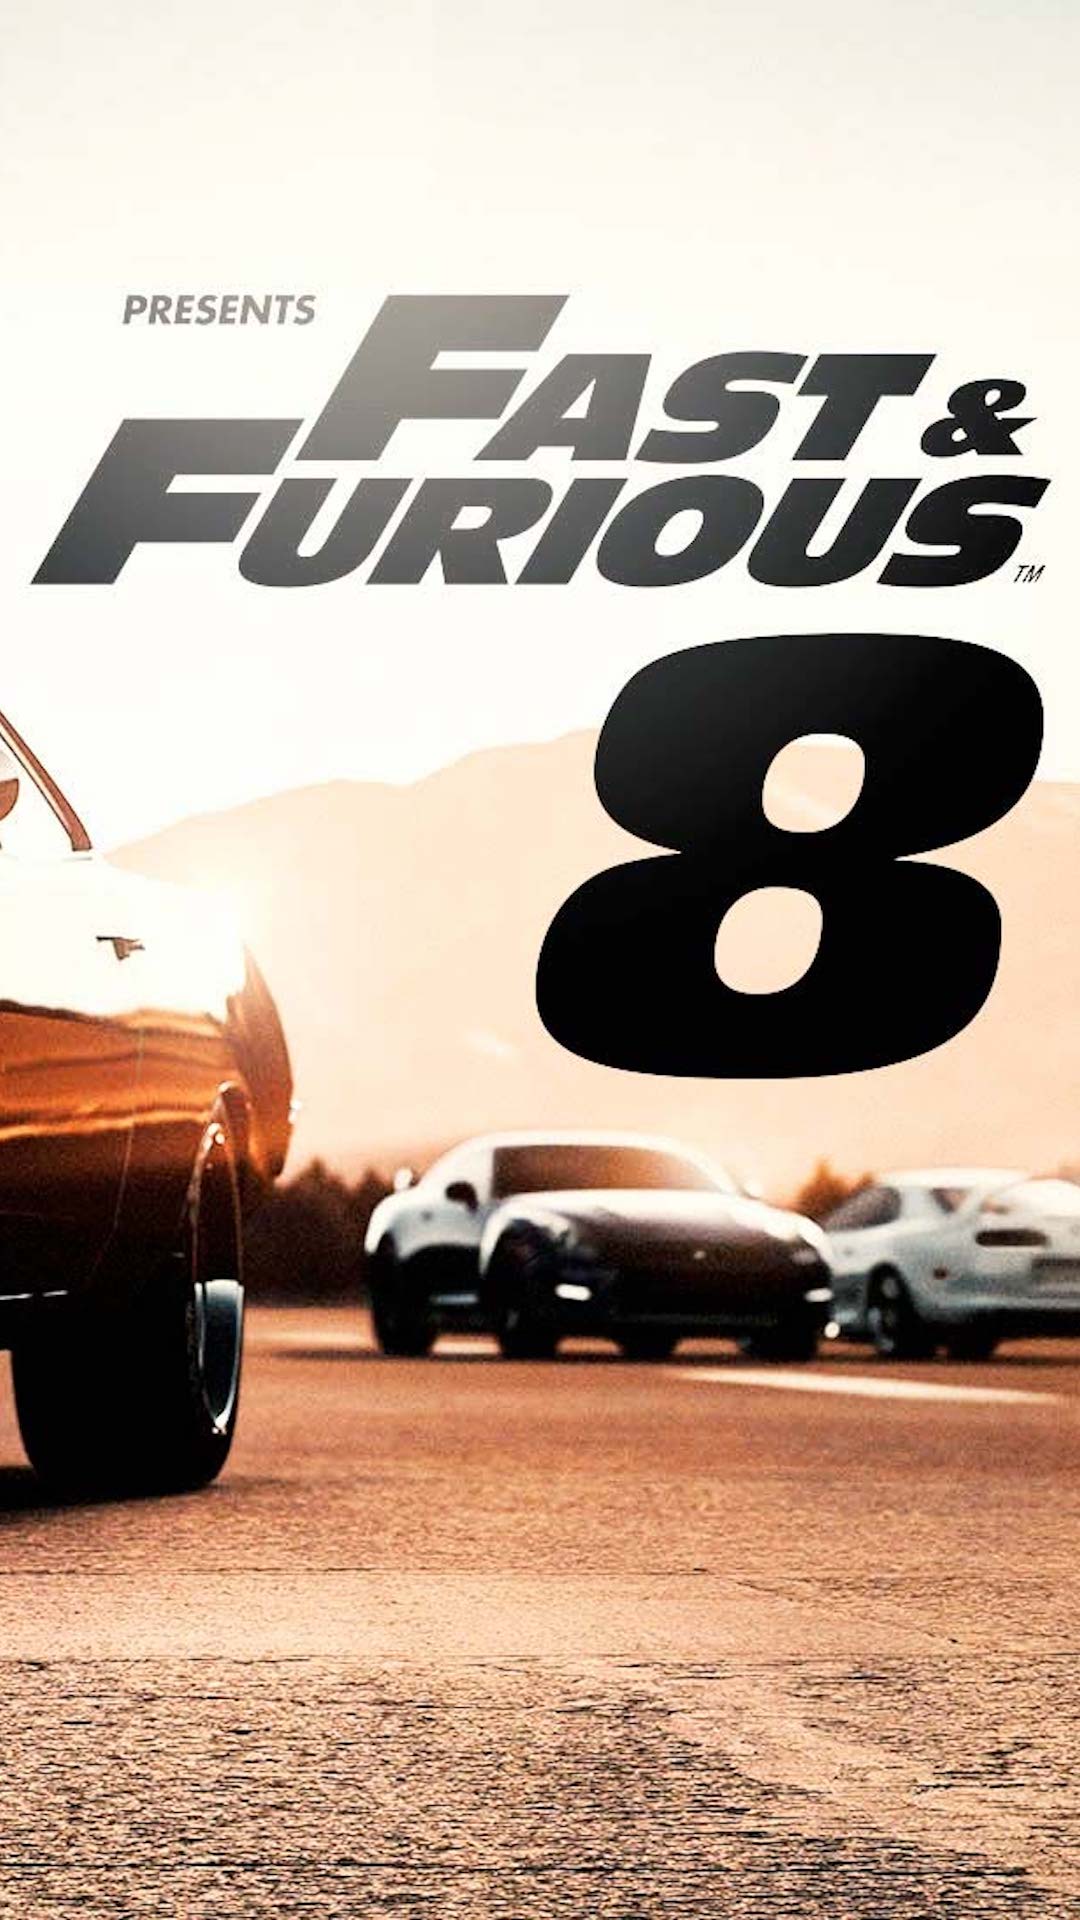 Fast & Furious 8 Movies iPhone Wallpaper